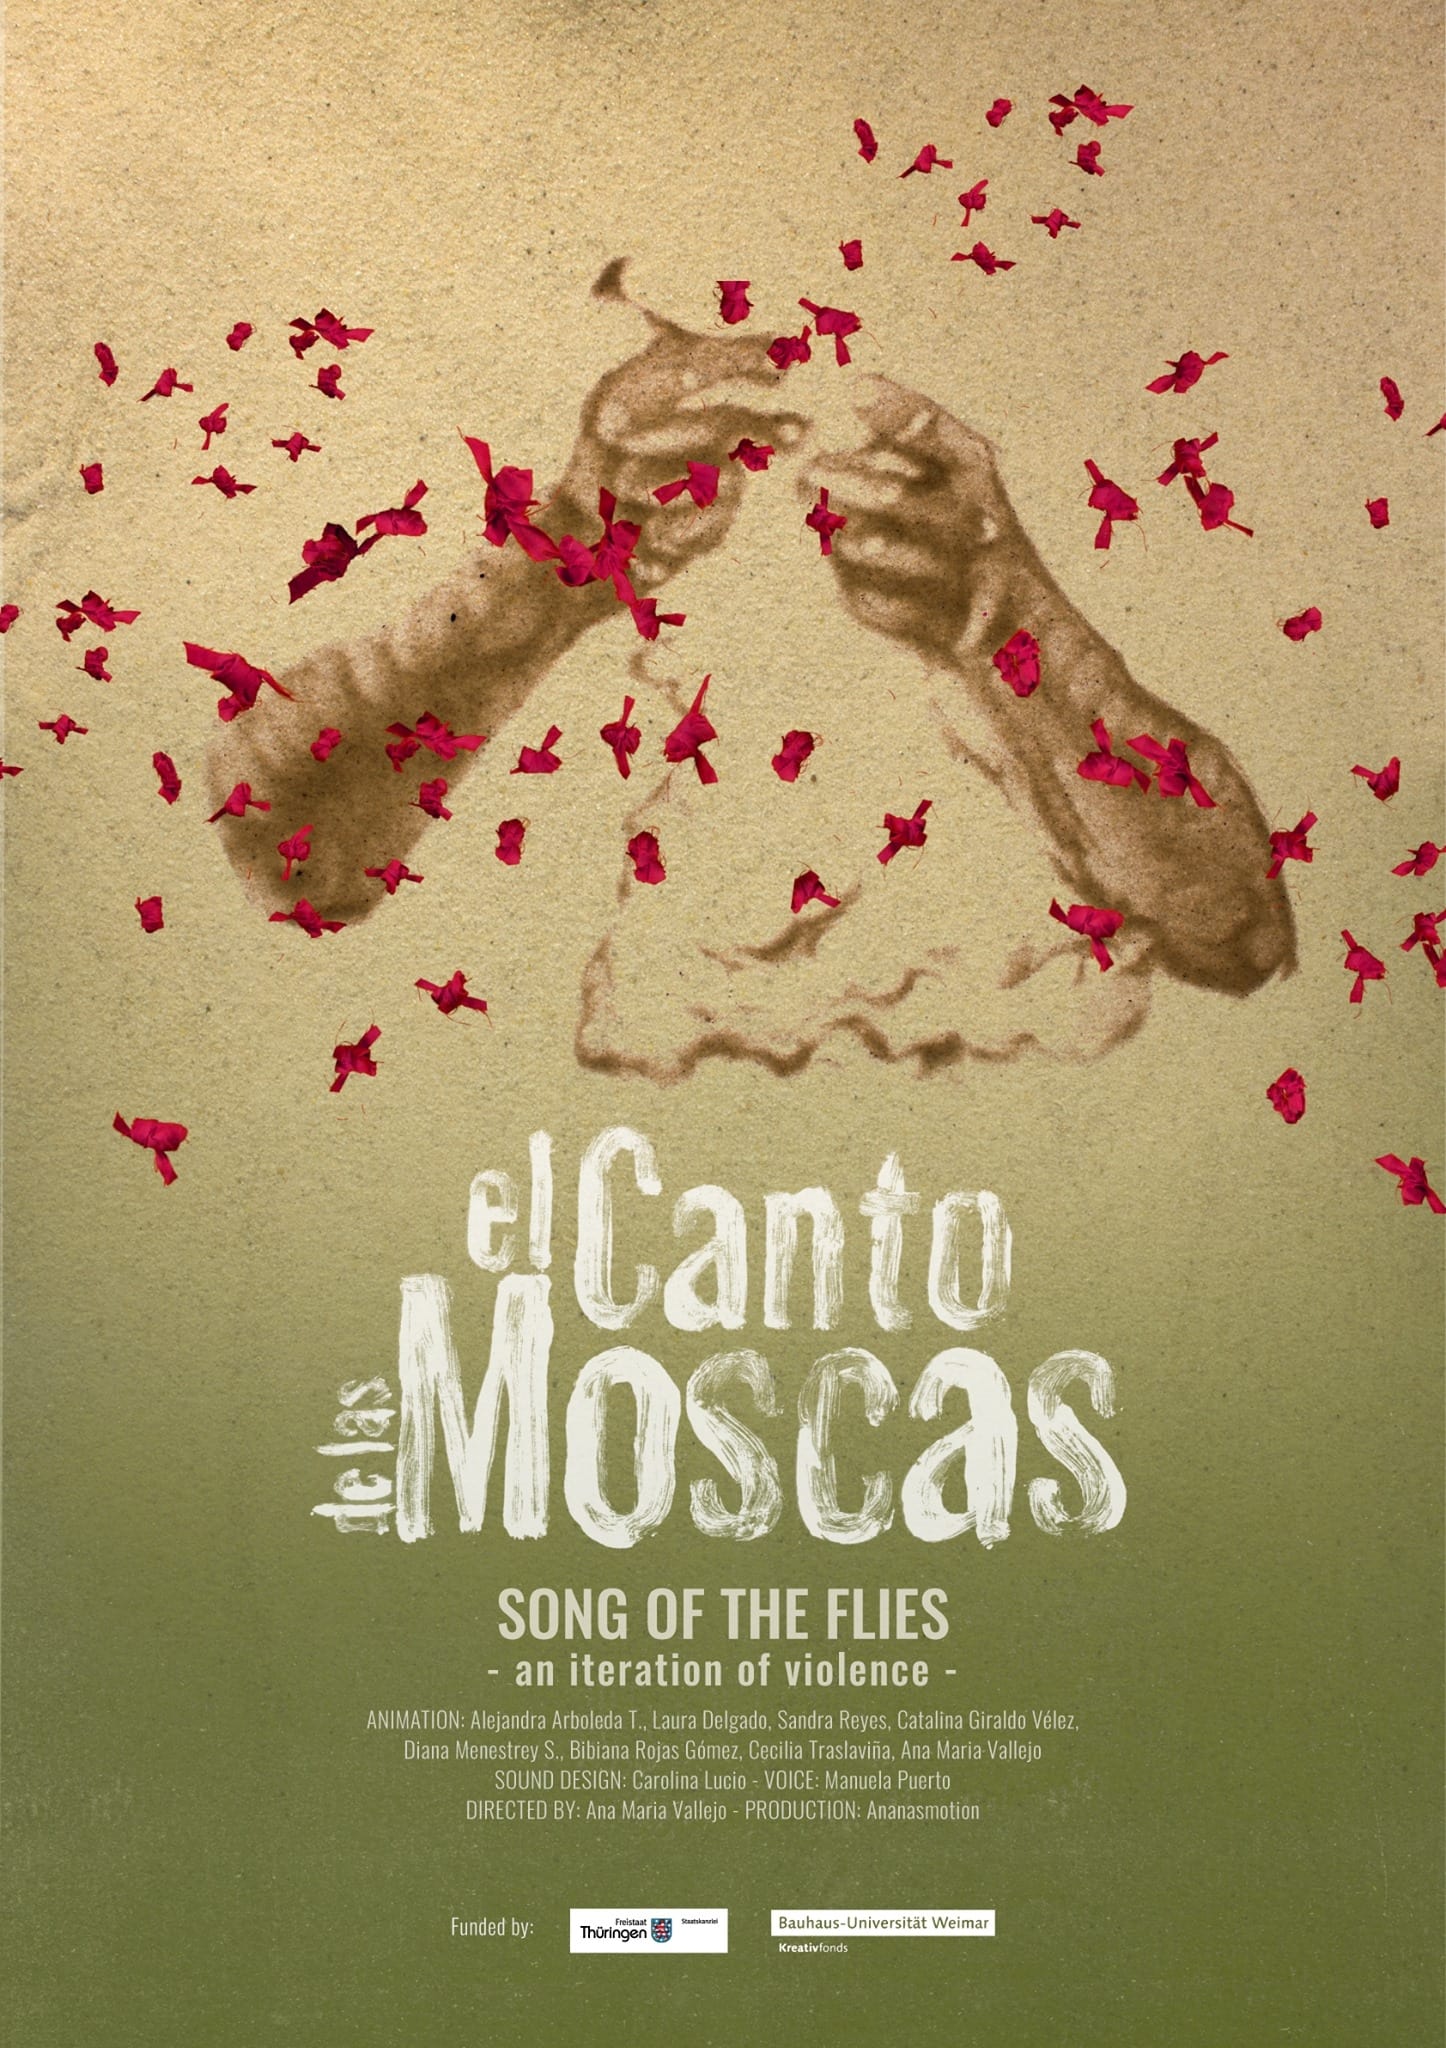 Song of the Flies